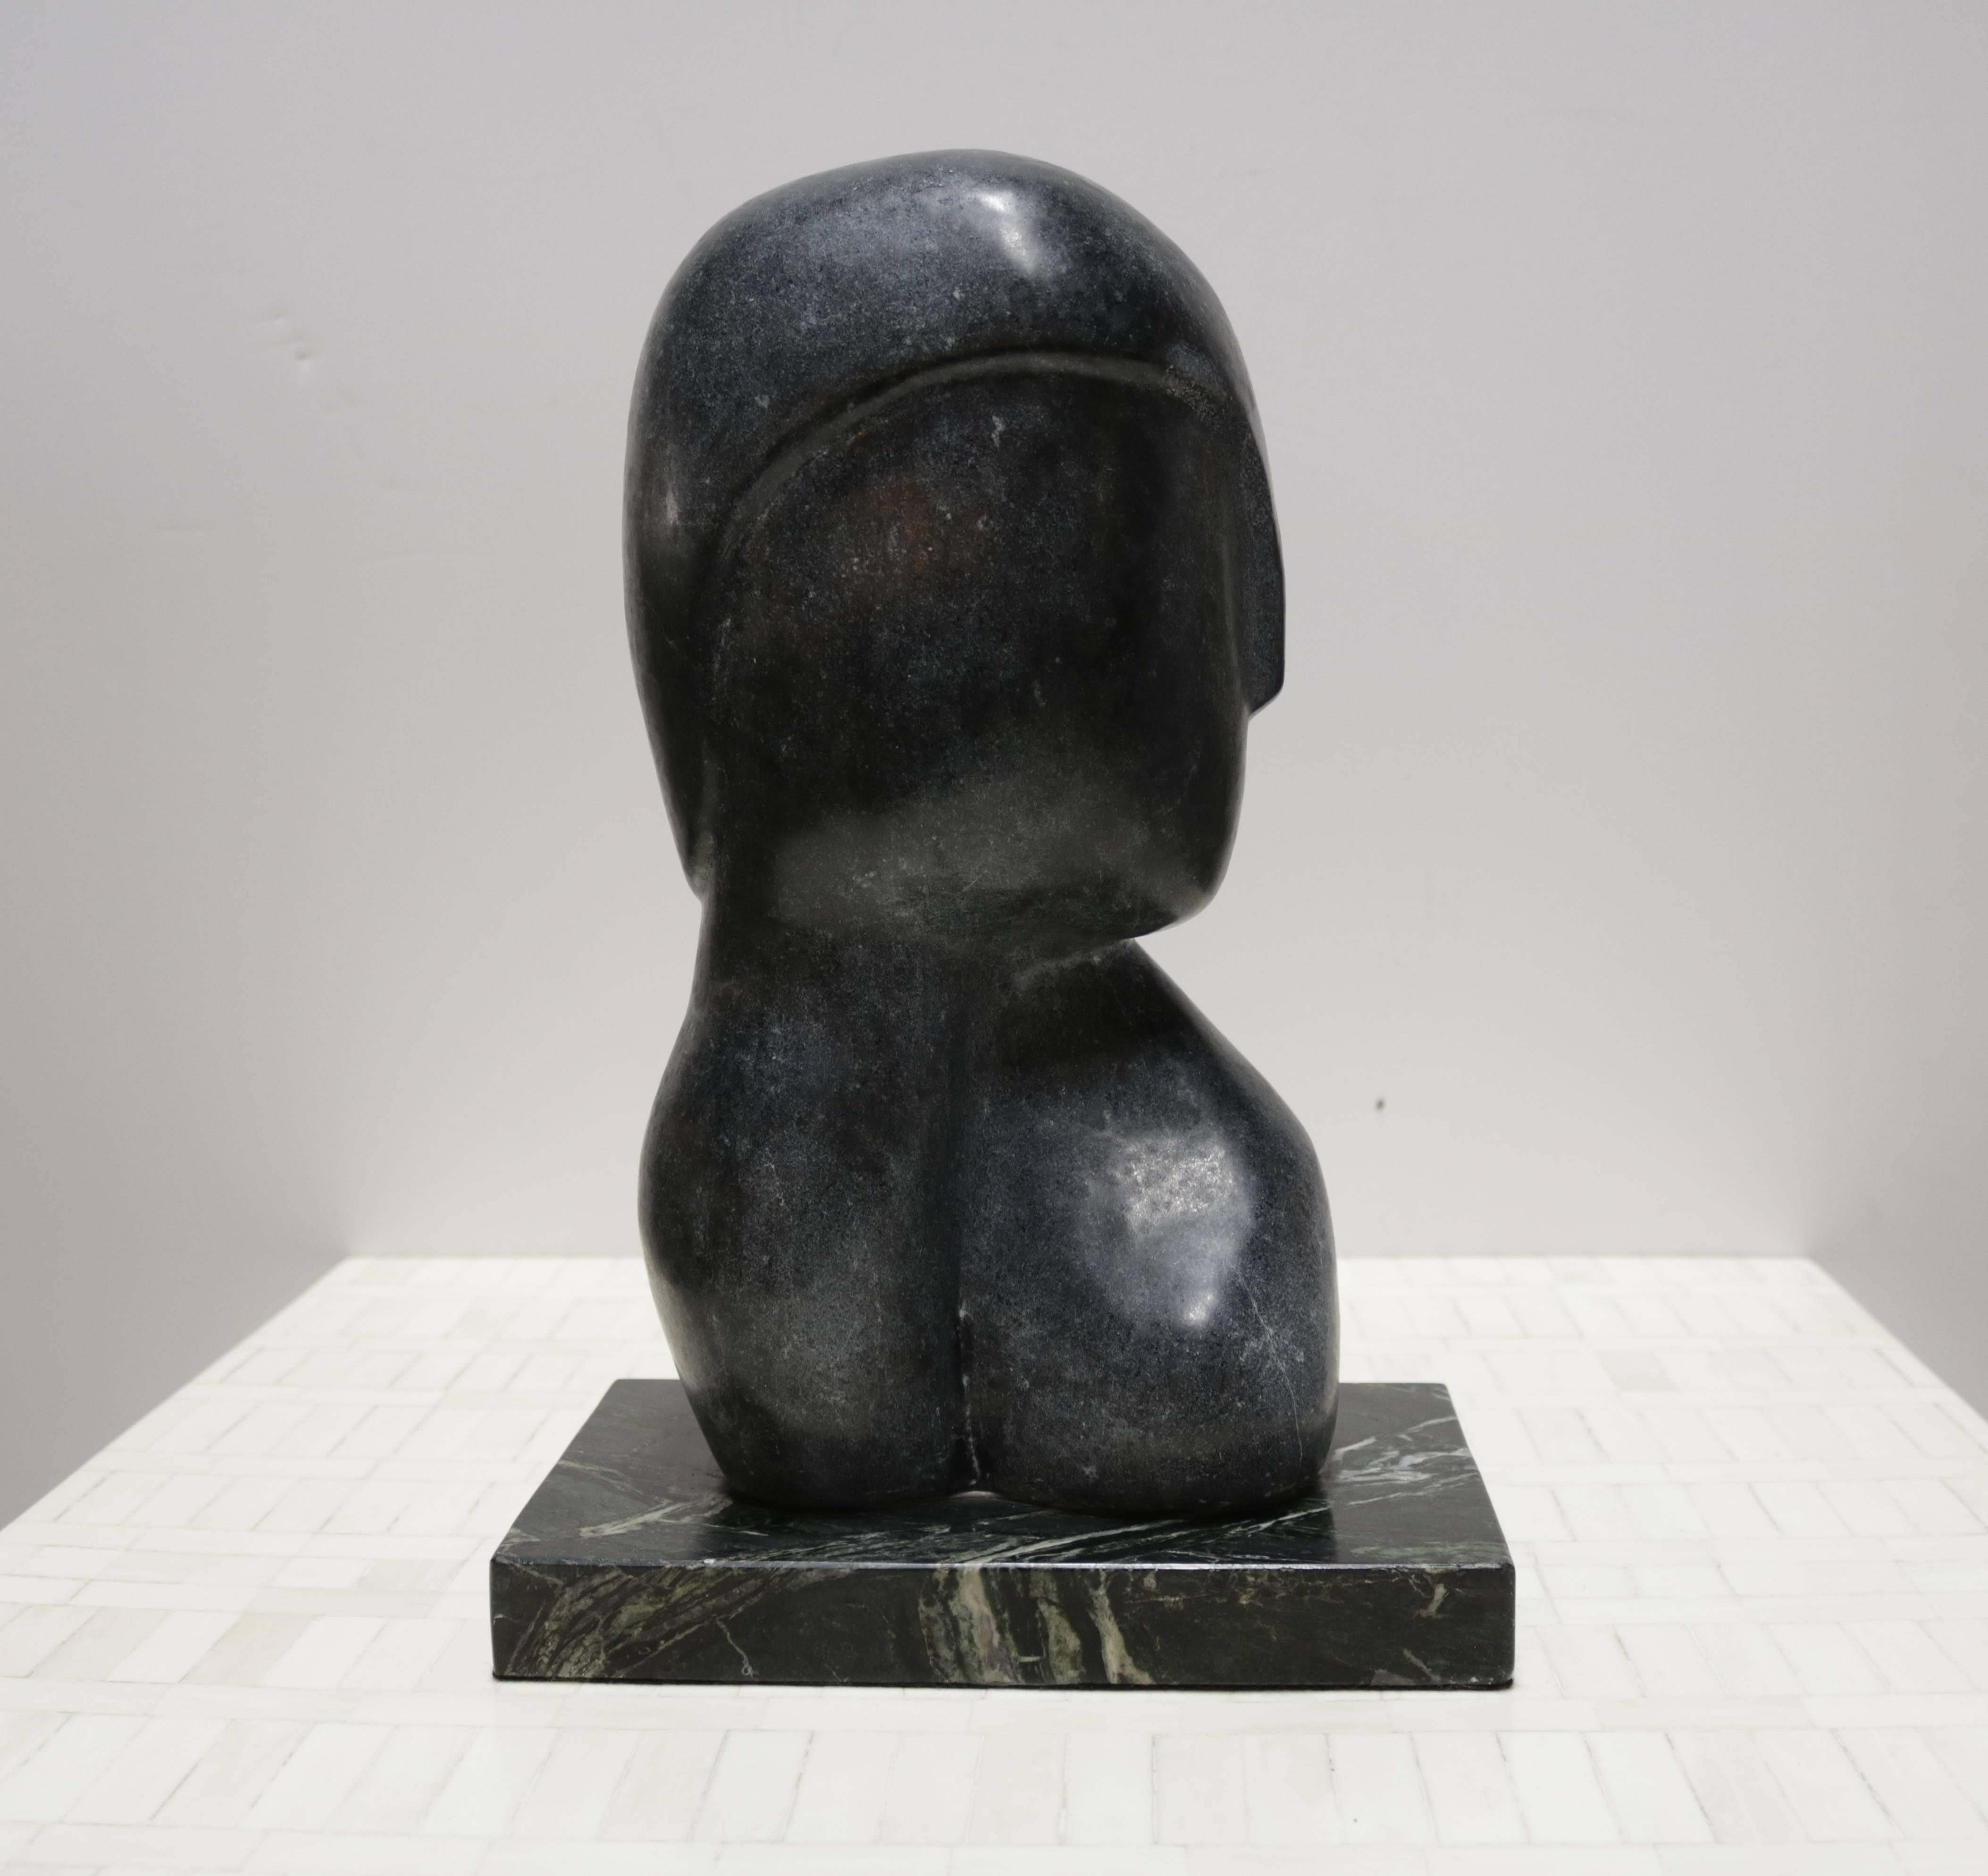 Strong black marble figurative sculpture on marble base. Signed on one side "Yospin '90".